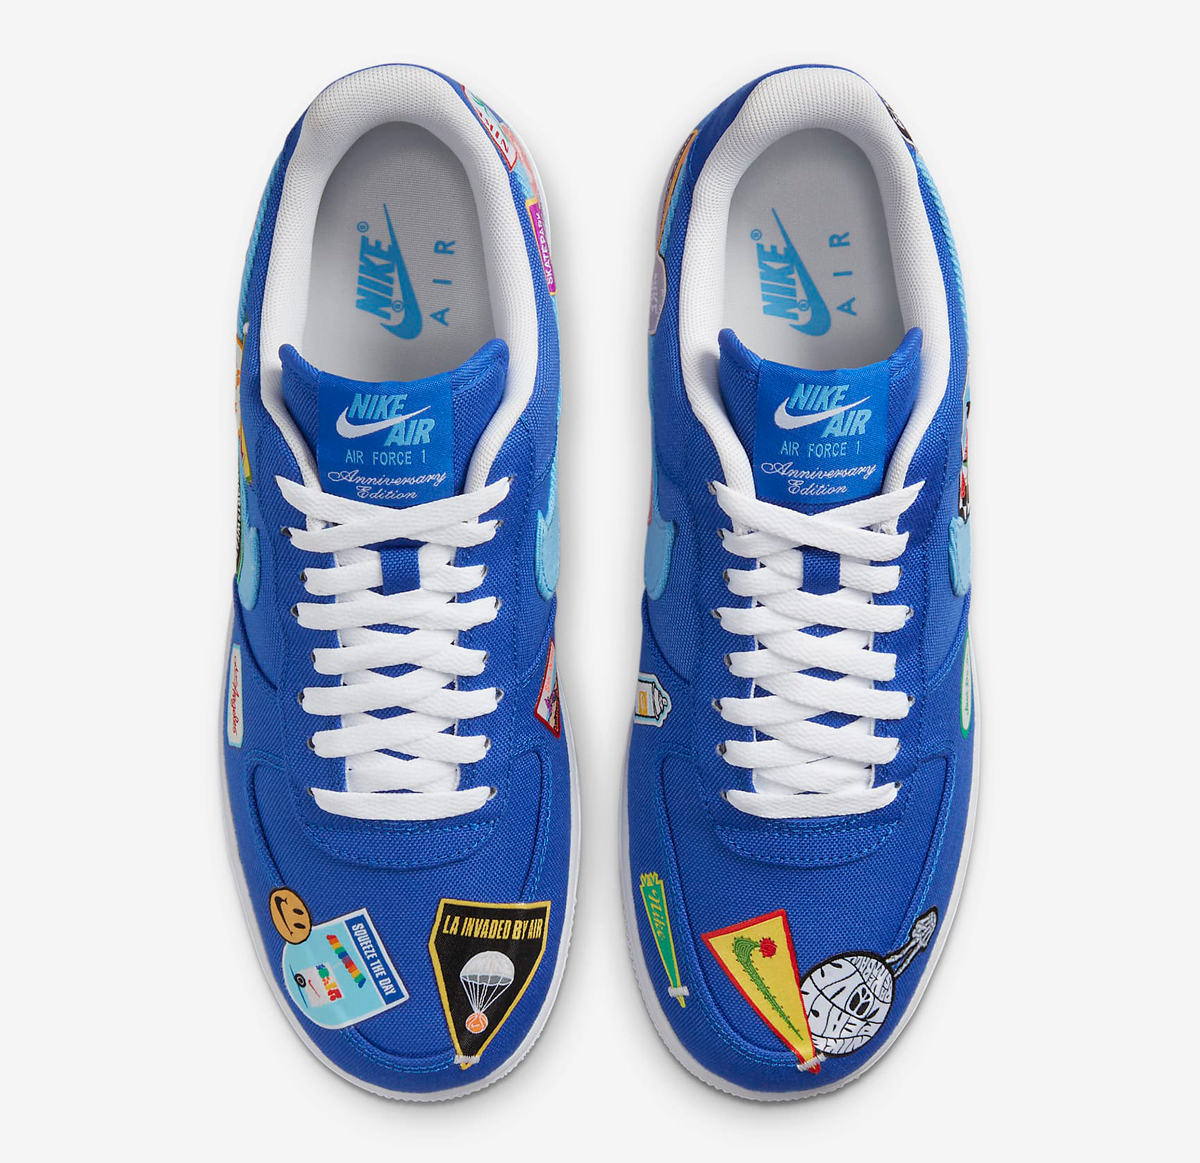 nike-air-force-1-low-los-angeles-patched-up-release-date-4